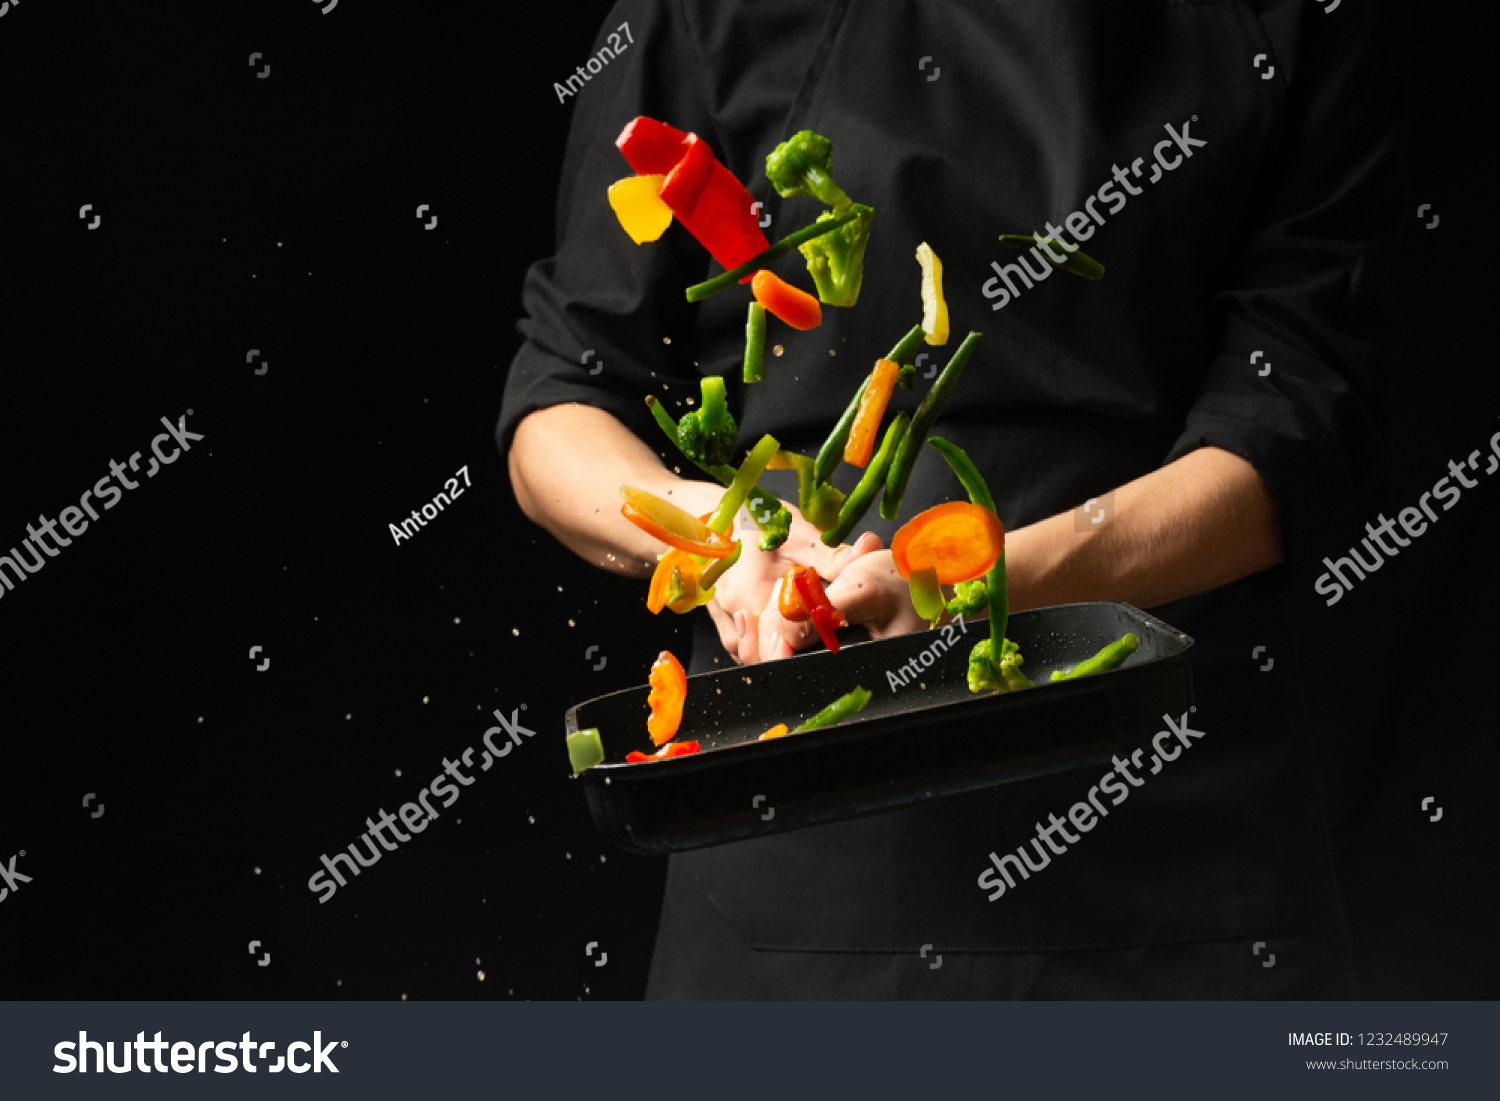 Professional cook. He prepares a dish with vegetables in a saucepan. on black background, menu, recipe book, healthy food #1232489947